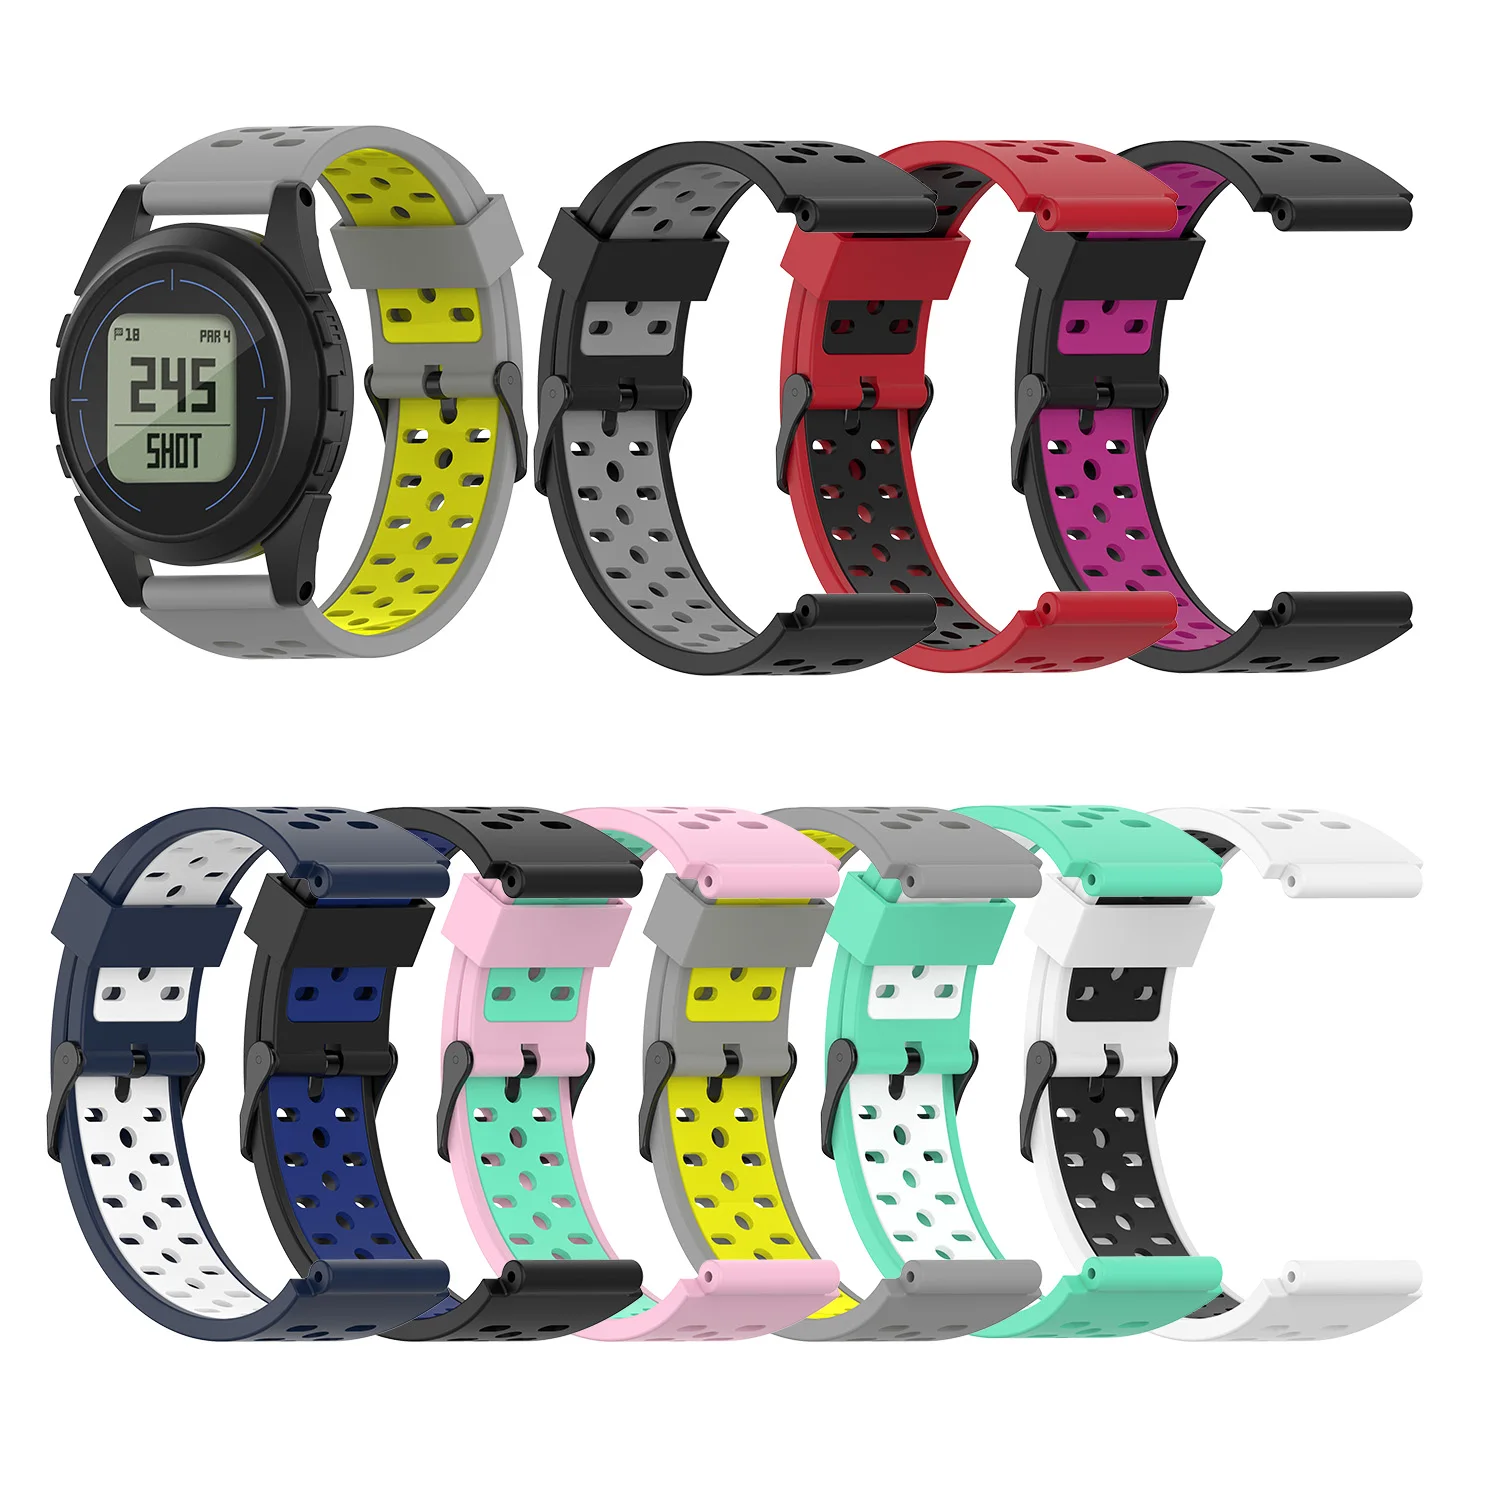 Uafhængig Ferie Forventning Wholesale Silicone Strap for Bushnell Excel Golf GPS Watch Replacement  Wristband for Bushnell Neo Ion1 2 Smart Watch Band Accessories From  m.alibaba.com